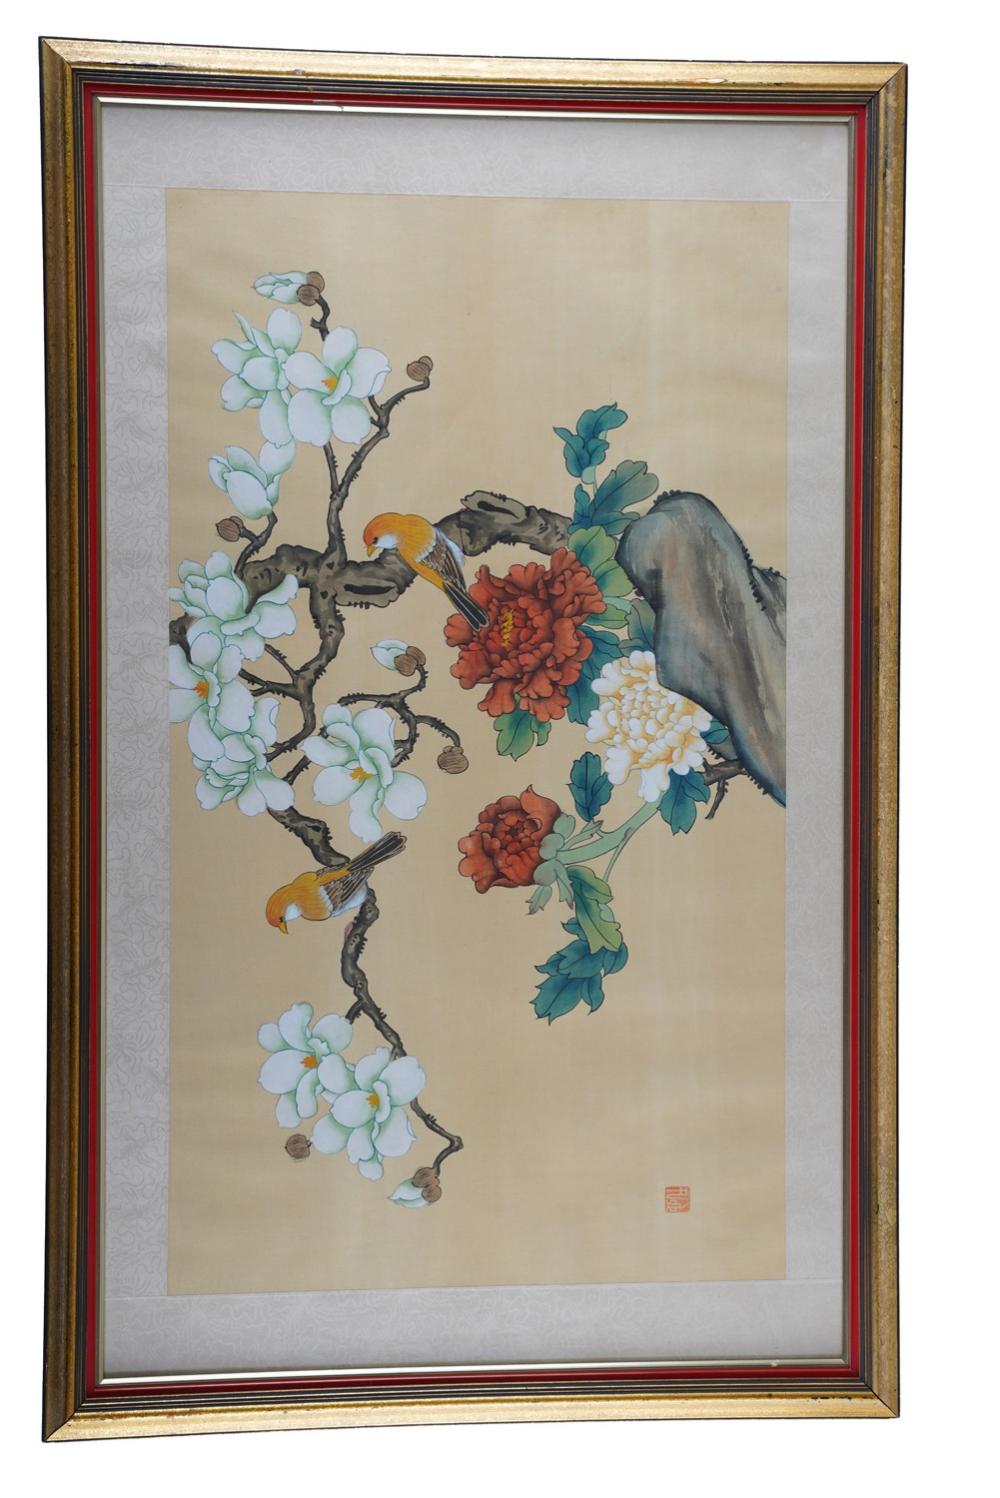 CHINESE FLORAL LANDSCAPE WITH BIRD35